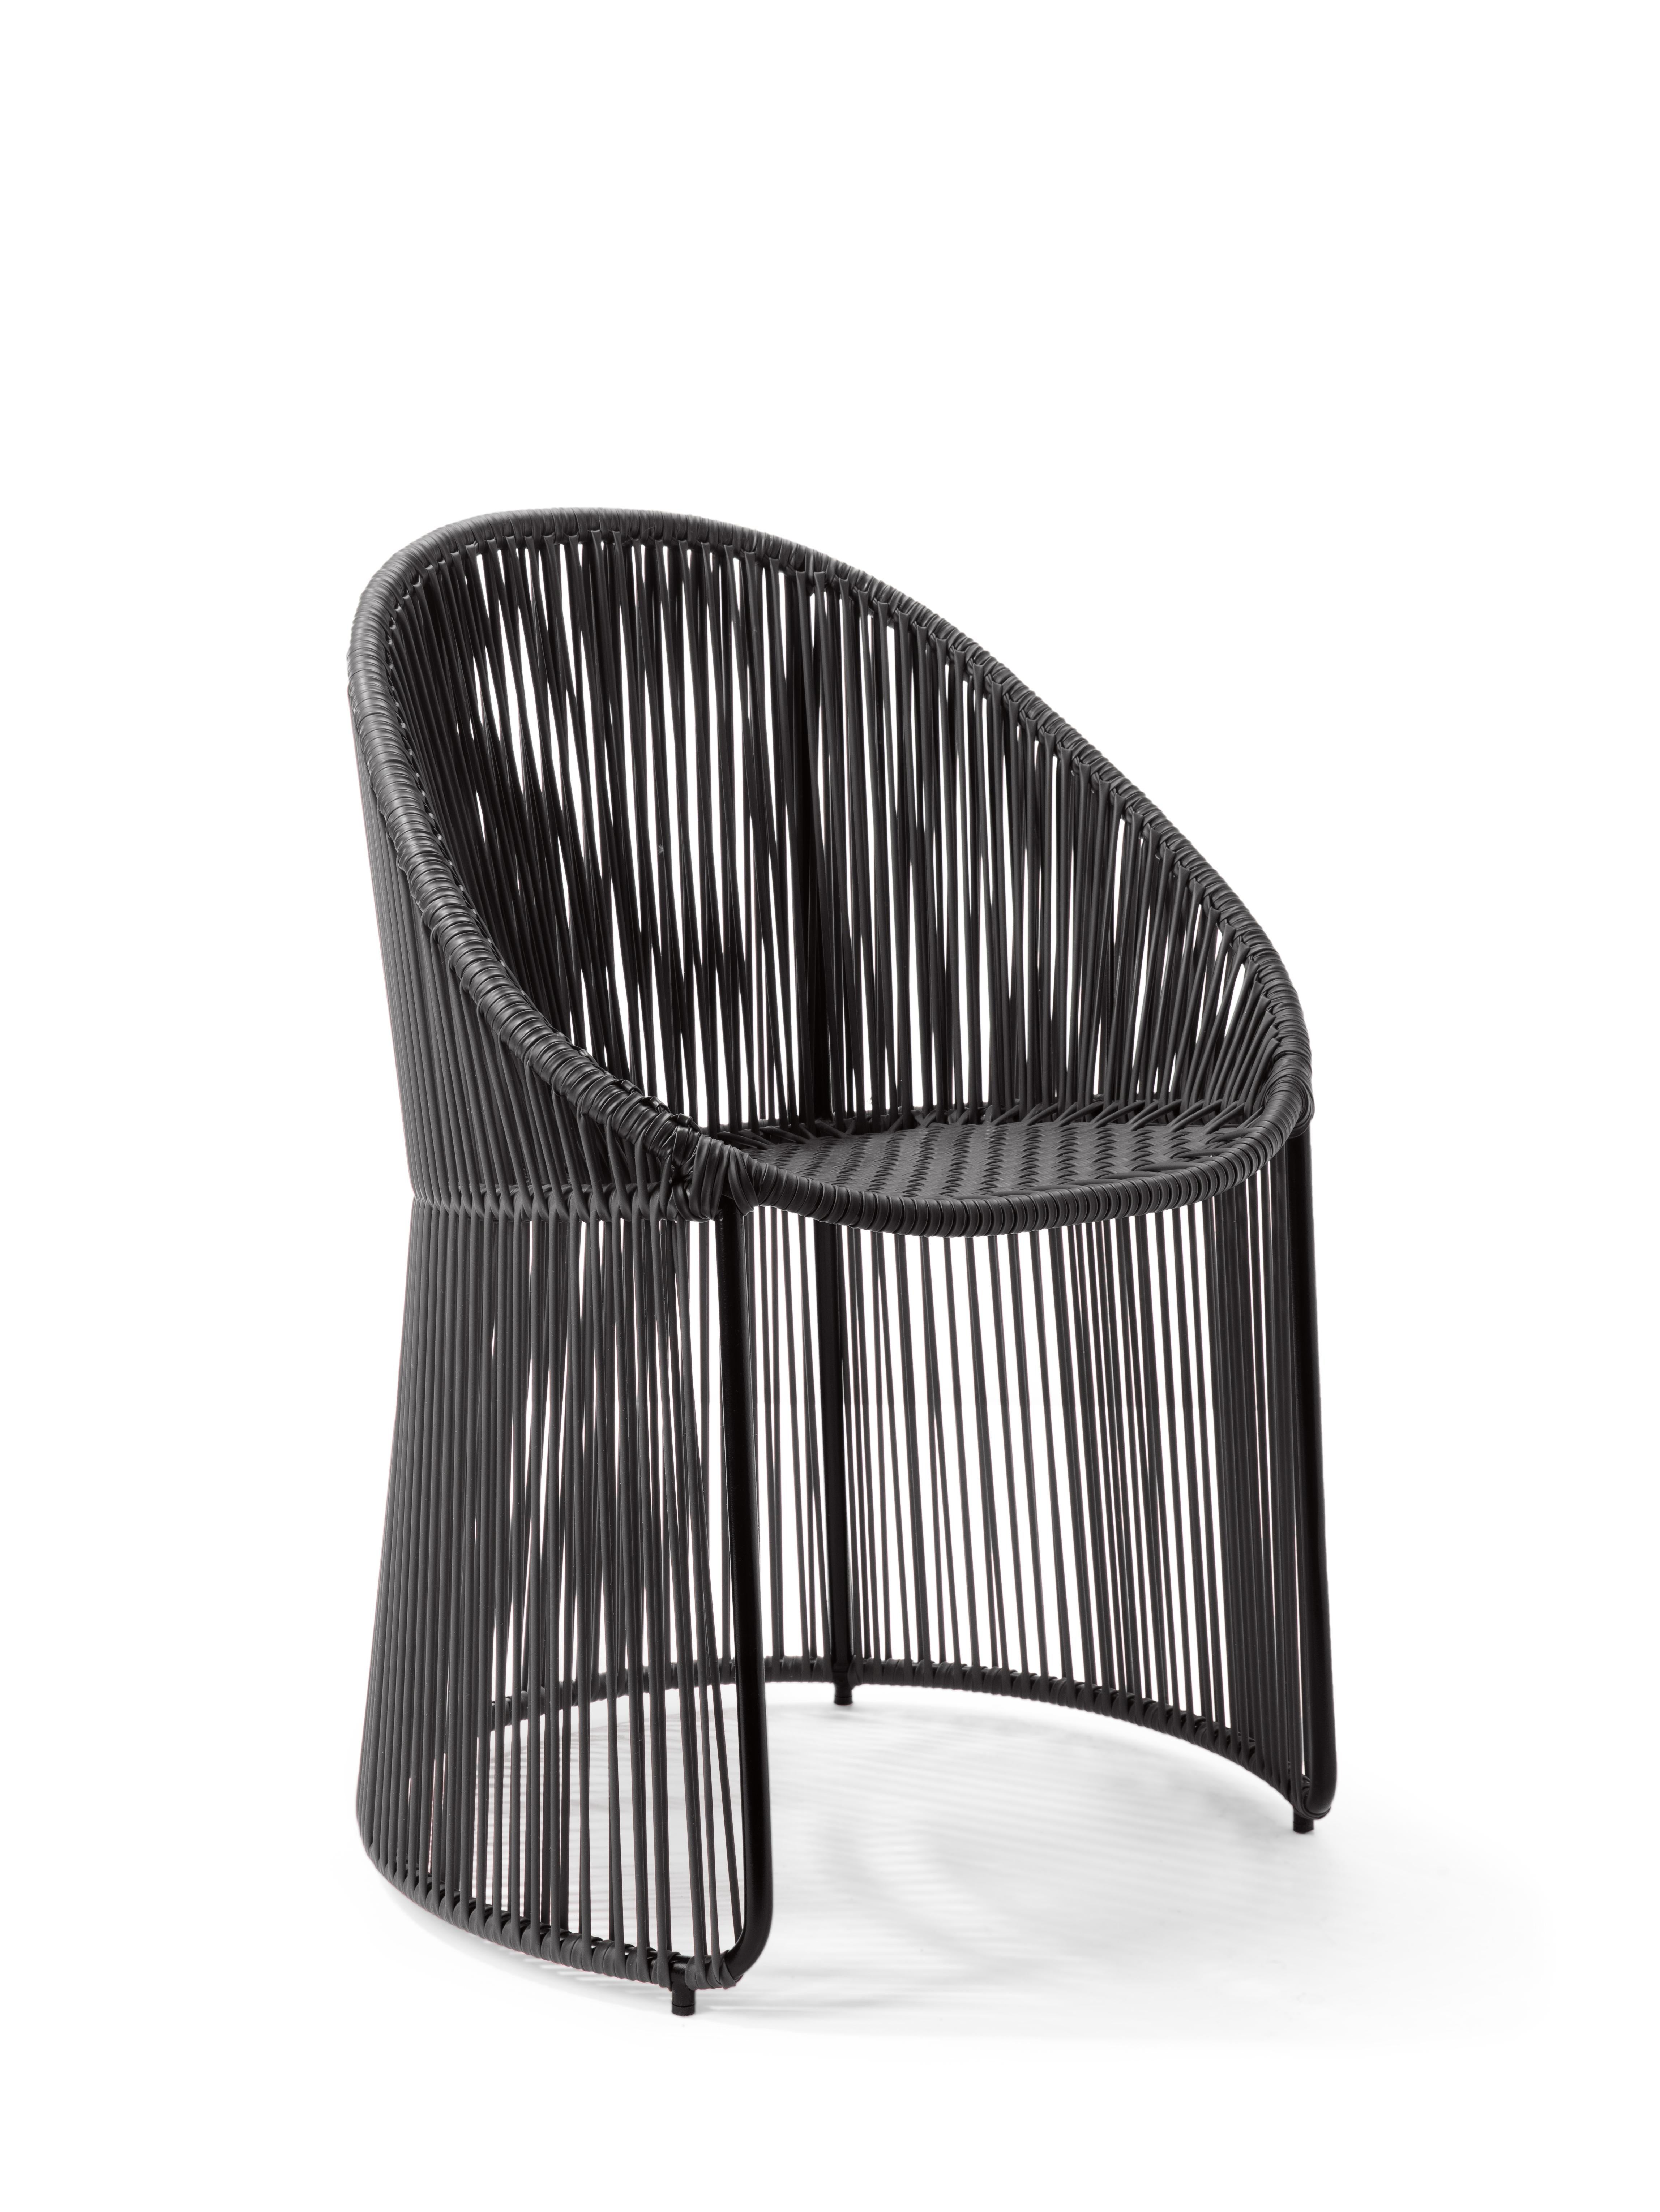 Black cartagenas dining chair by Sebastian Herkner
Materials: PVC strings. Galvanized and powder-coated tubular steel frame
Technique: made from recycled plastic. Weaved by local craftspeople in Colombia. 
Dimensions: W 60.2 x D 53.8 x H 84 cm